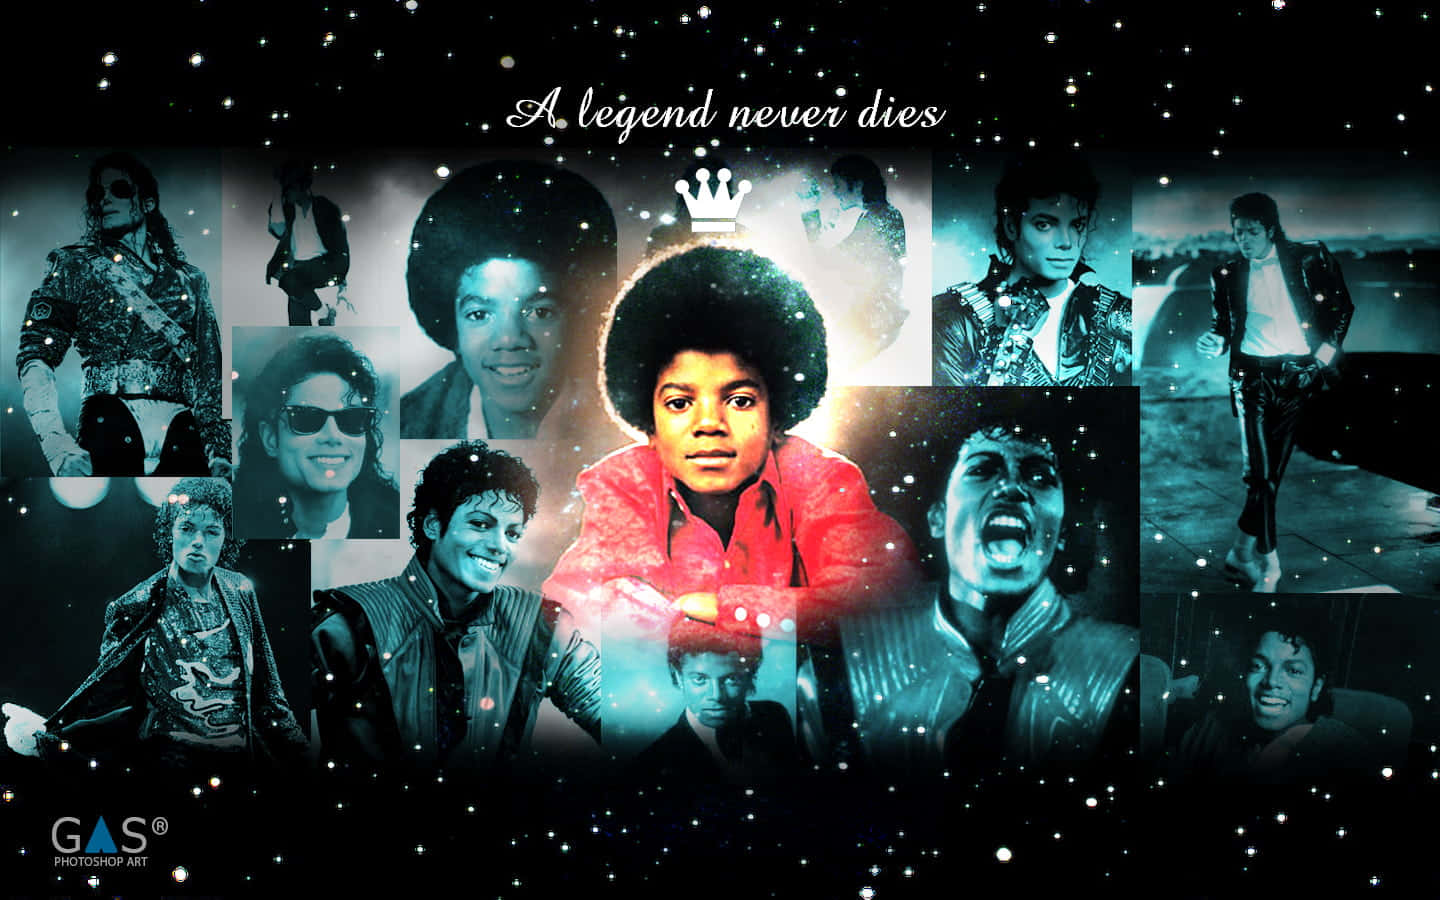 Young King of Pop, Michael Jackson